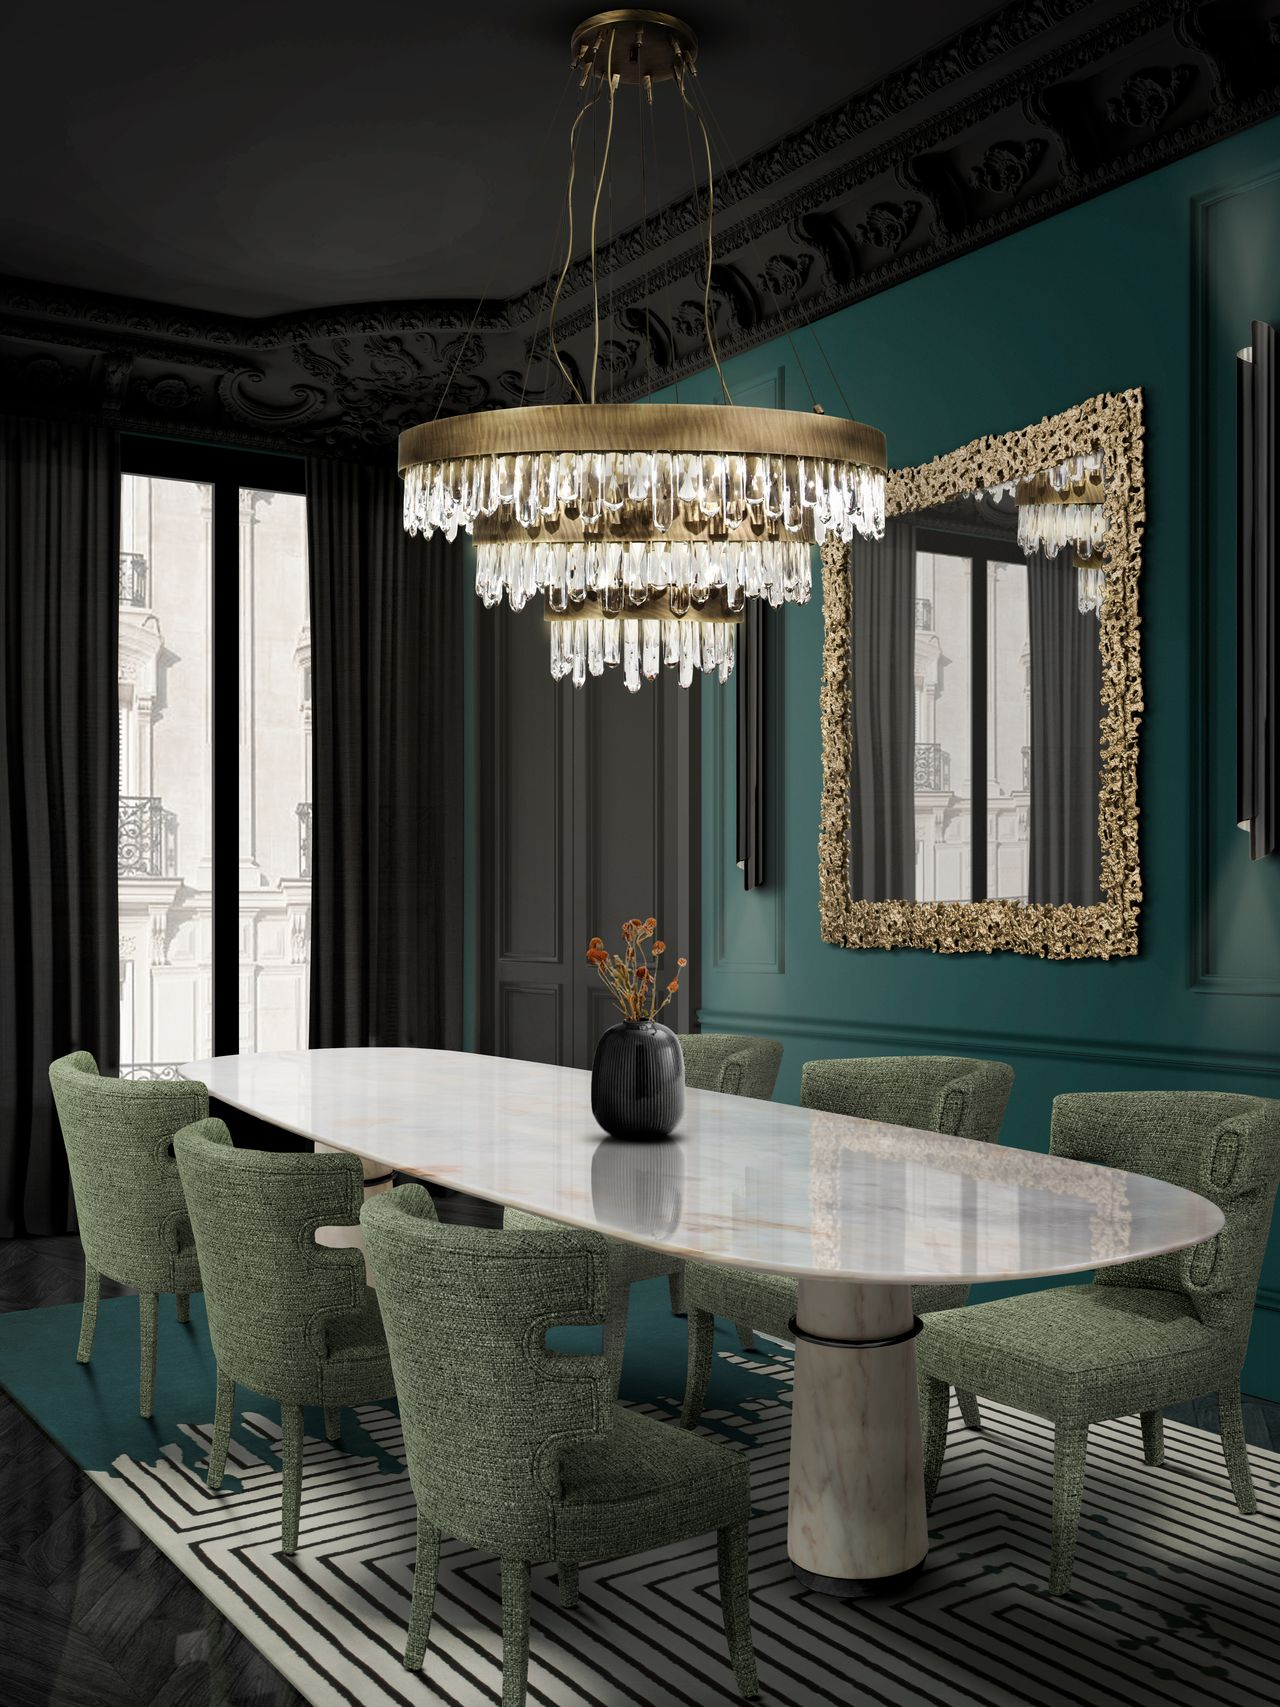 Dining Room Decor With a Matte-Casted Brass Mirror - Home'Society